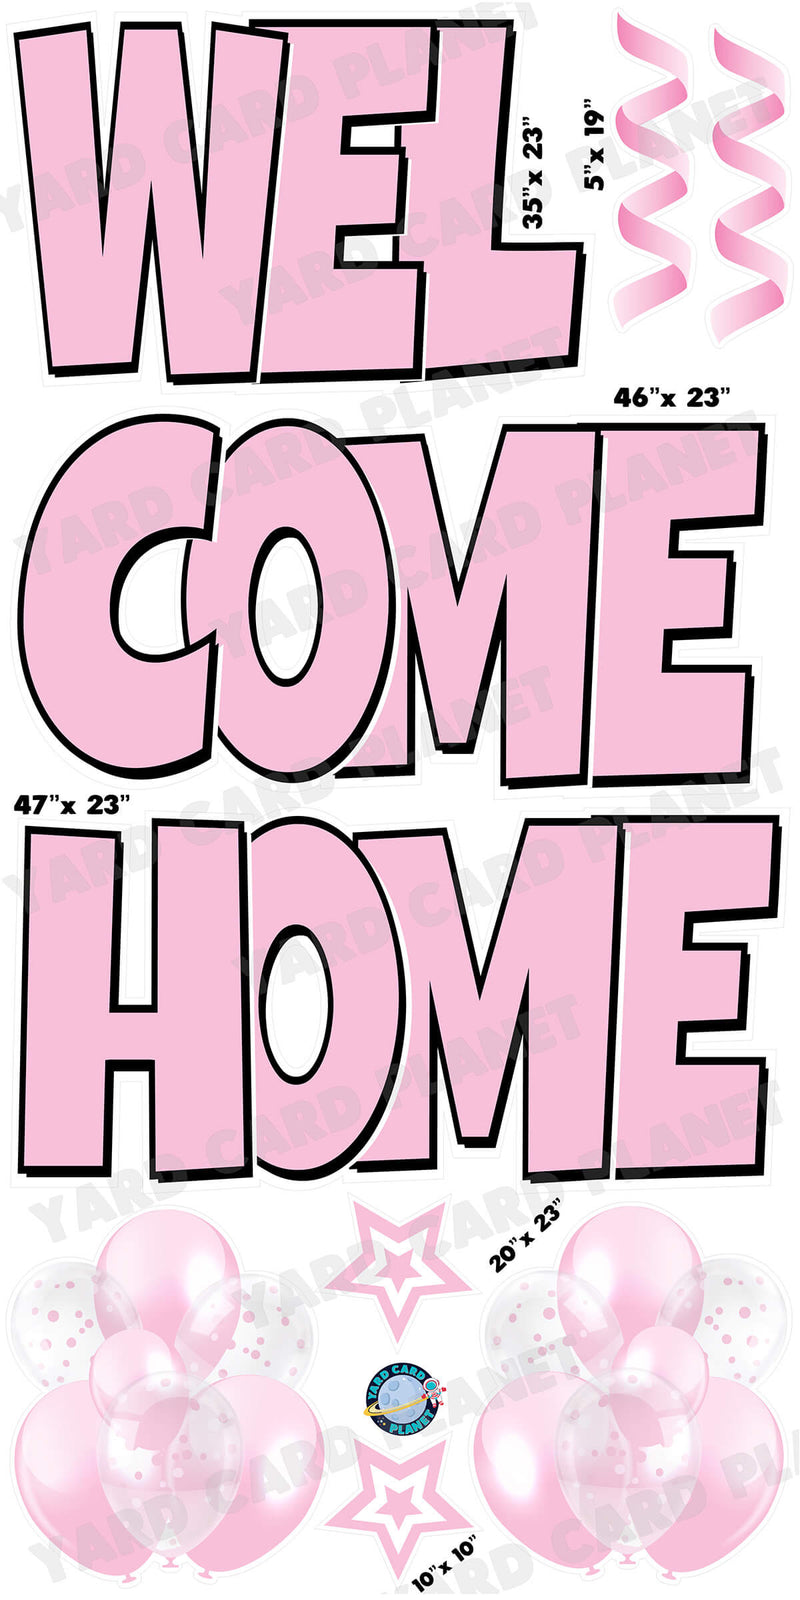 Large 23" Welcome Home Yard Card EZ Quick Sets in Luckiest Guy Font and Flair in Light Pink Solid Color